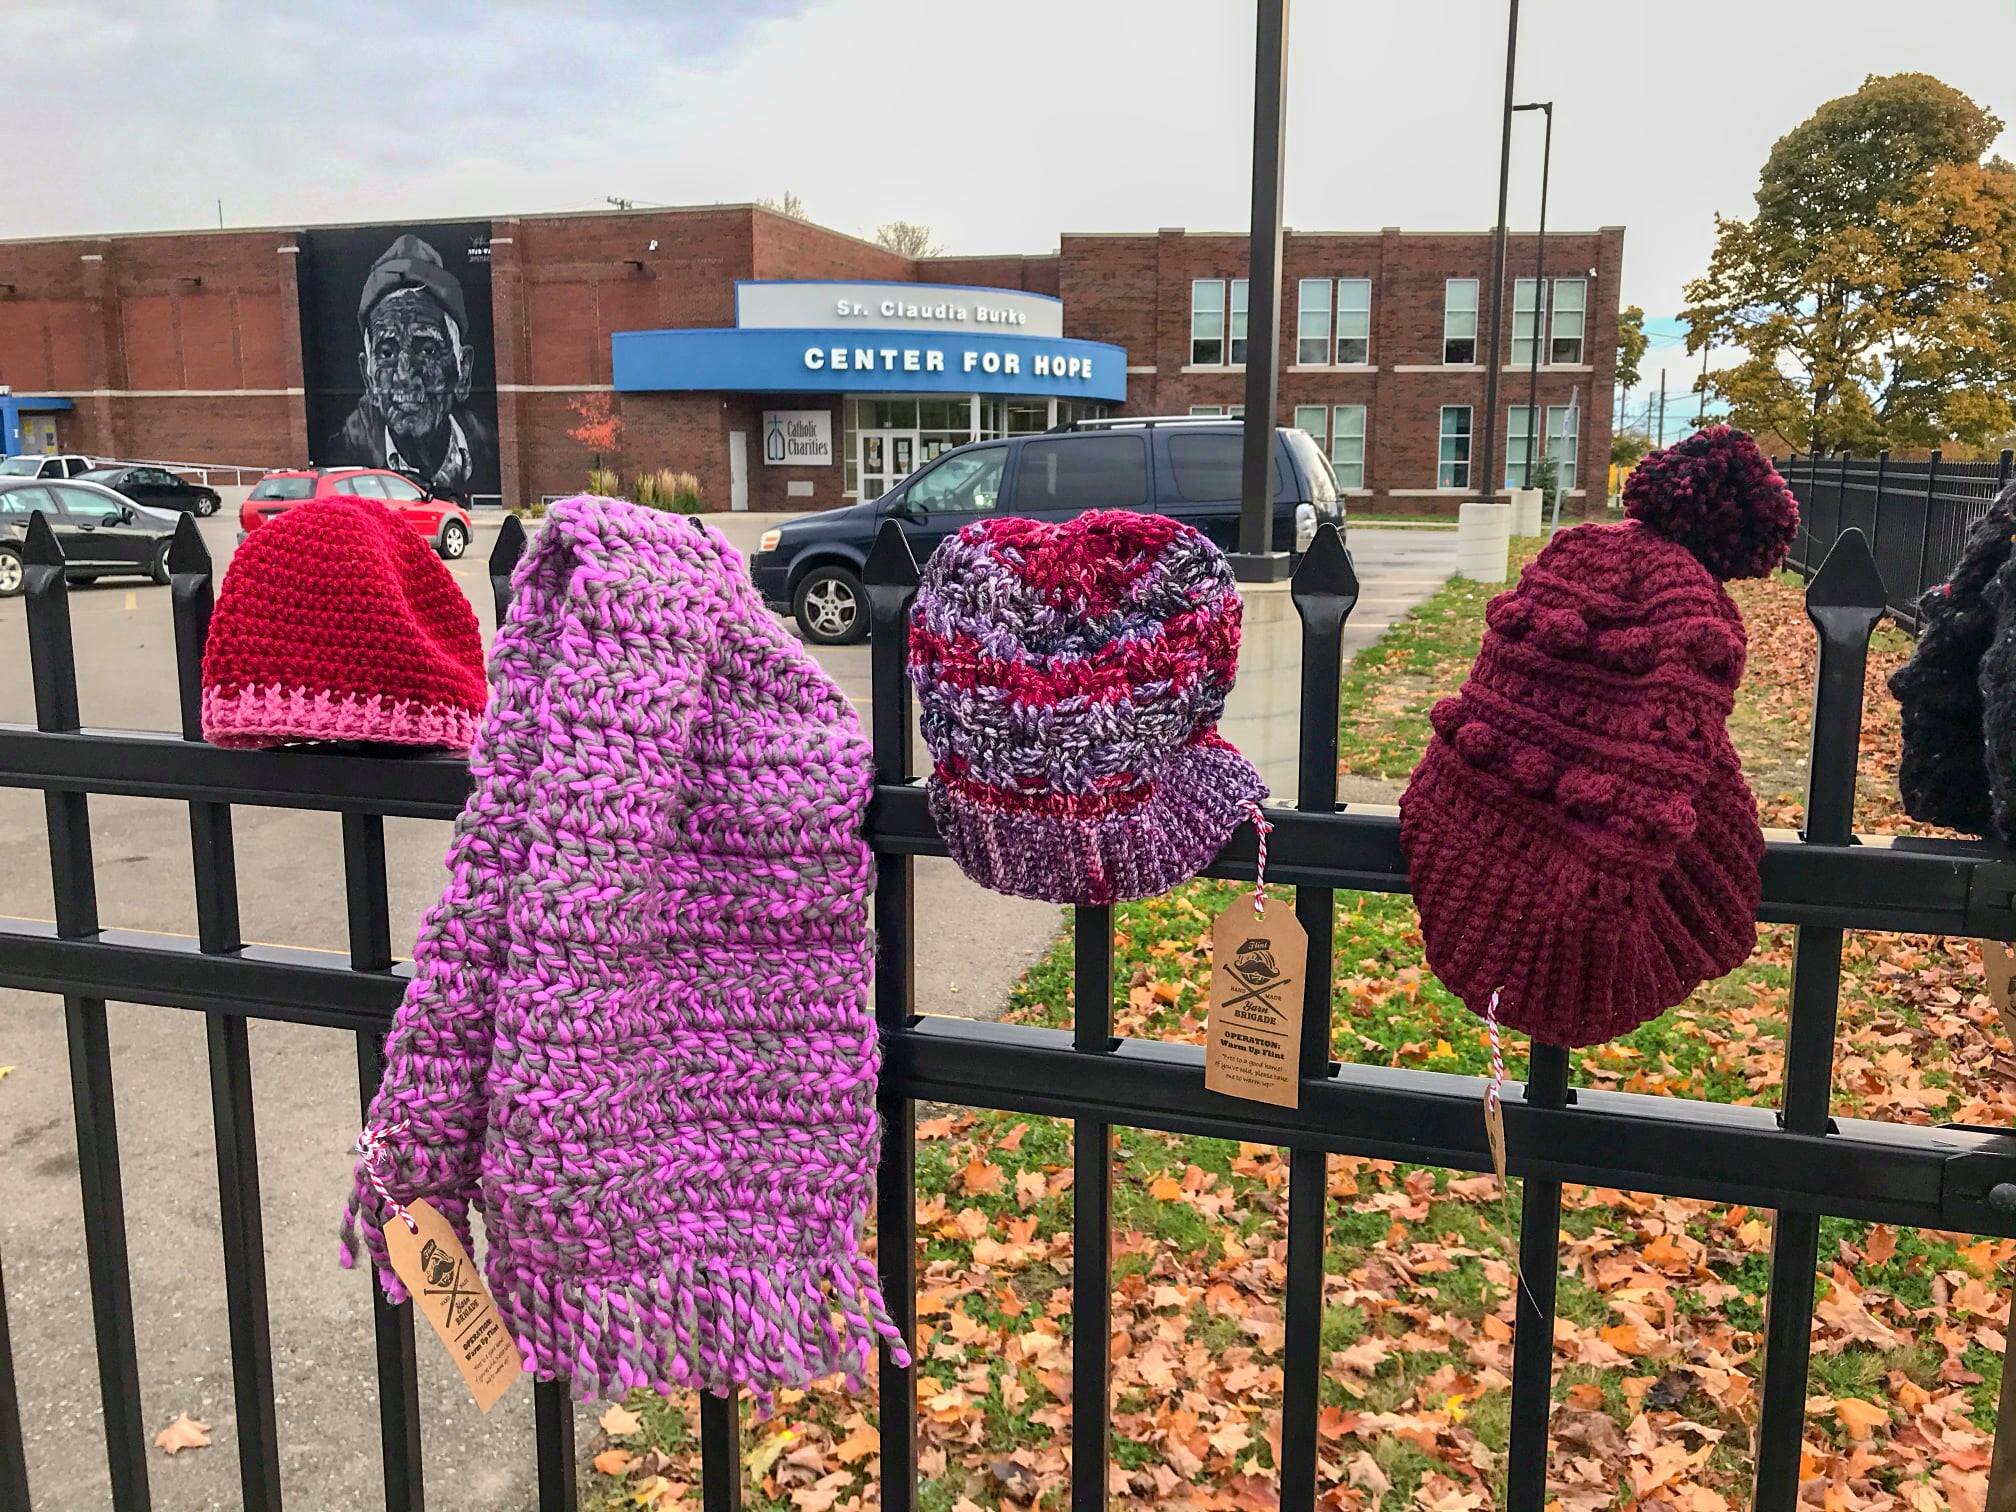 Flint Handmade volunteers made and donated more than 500 hats, scarves, and gloves at locations around the city in December.